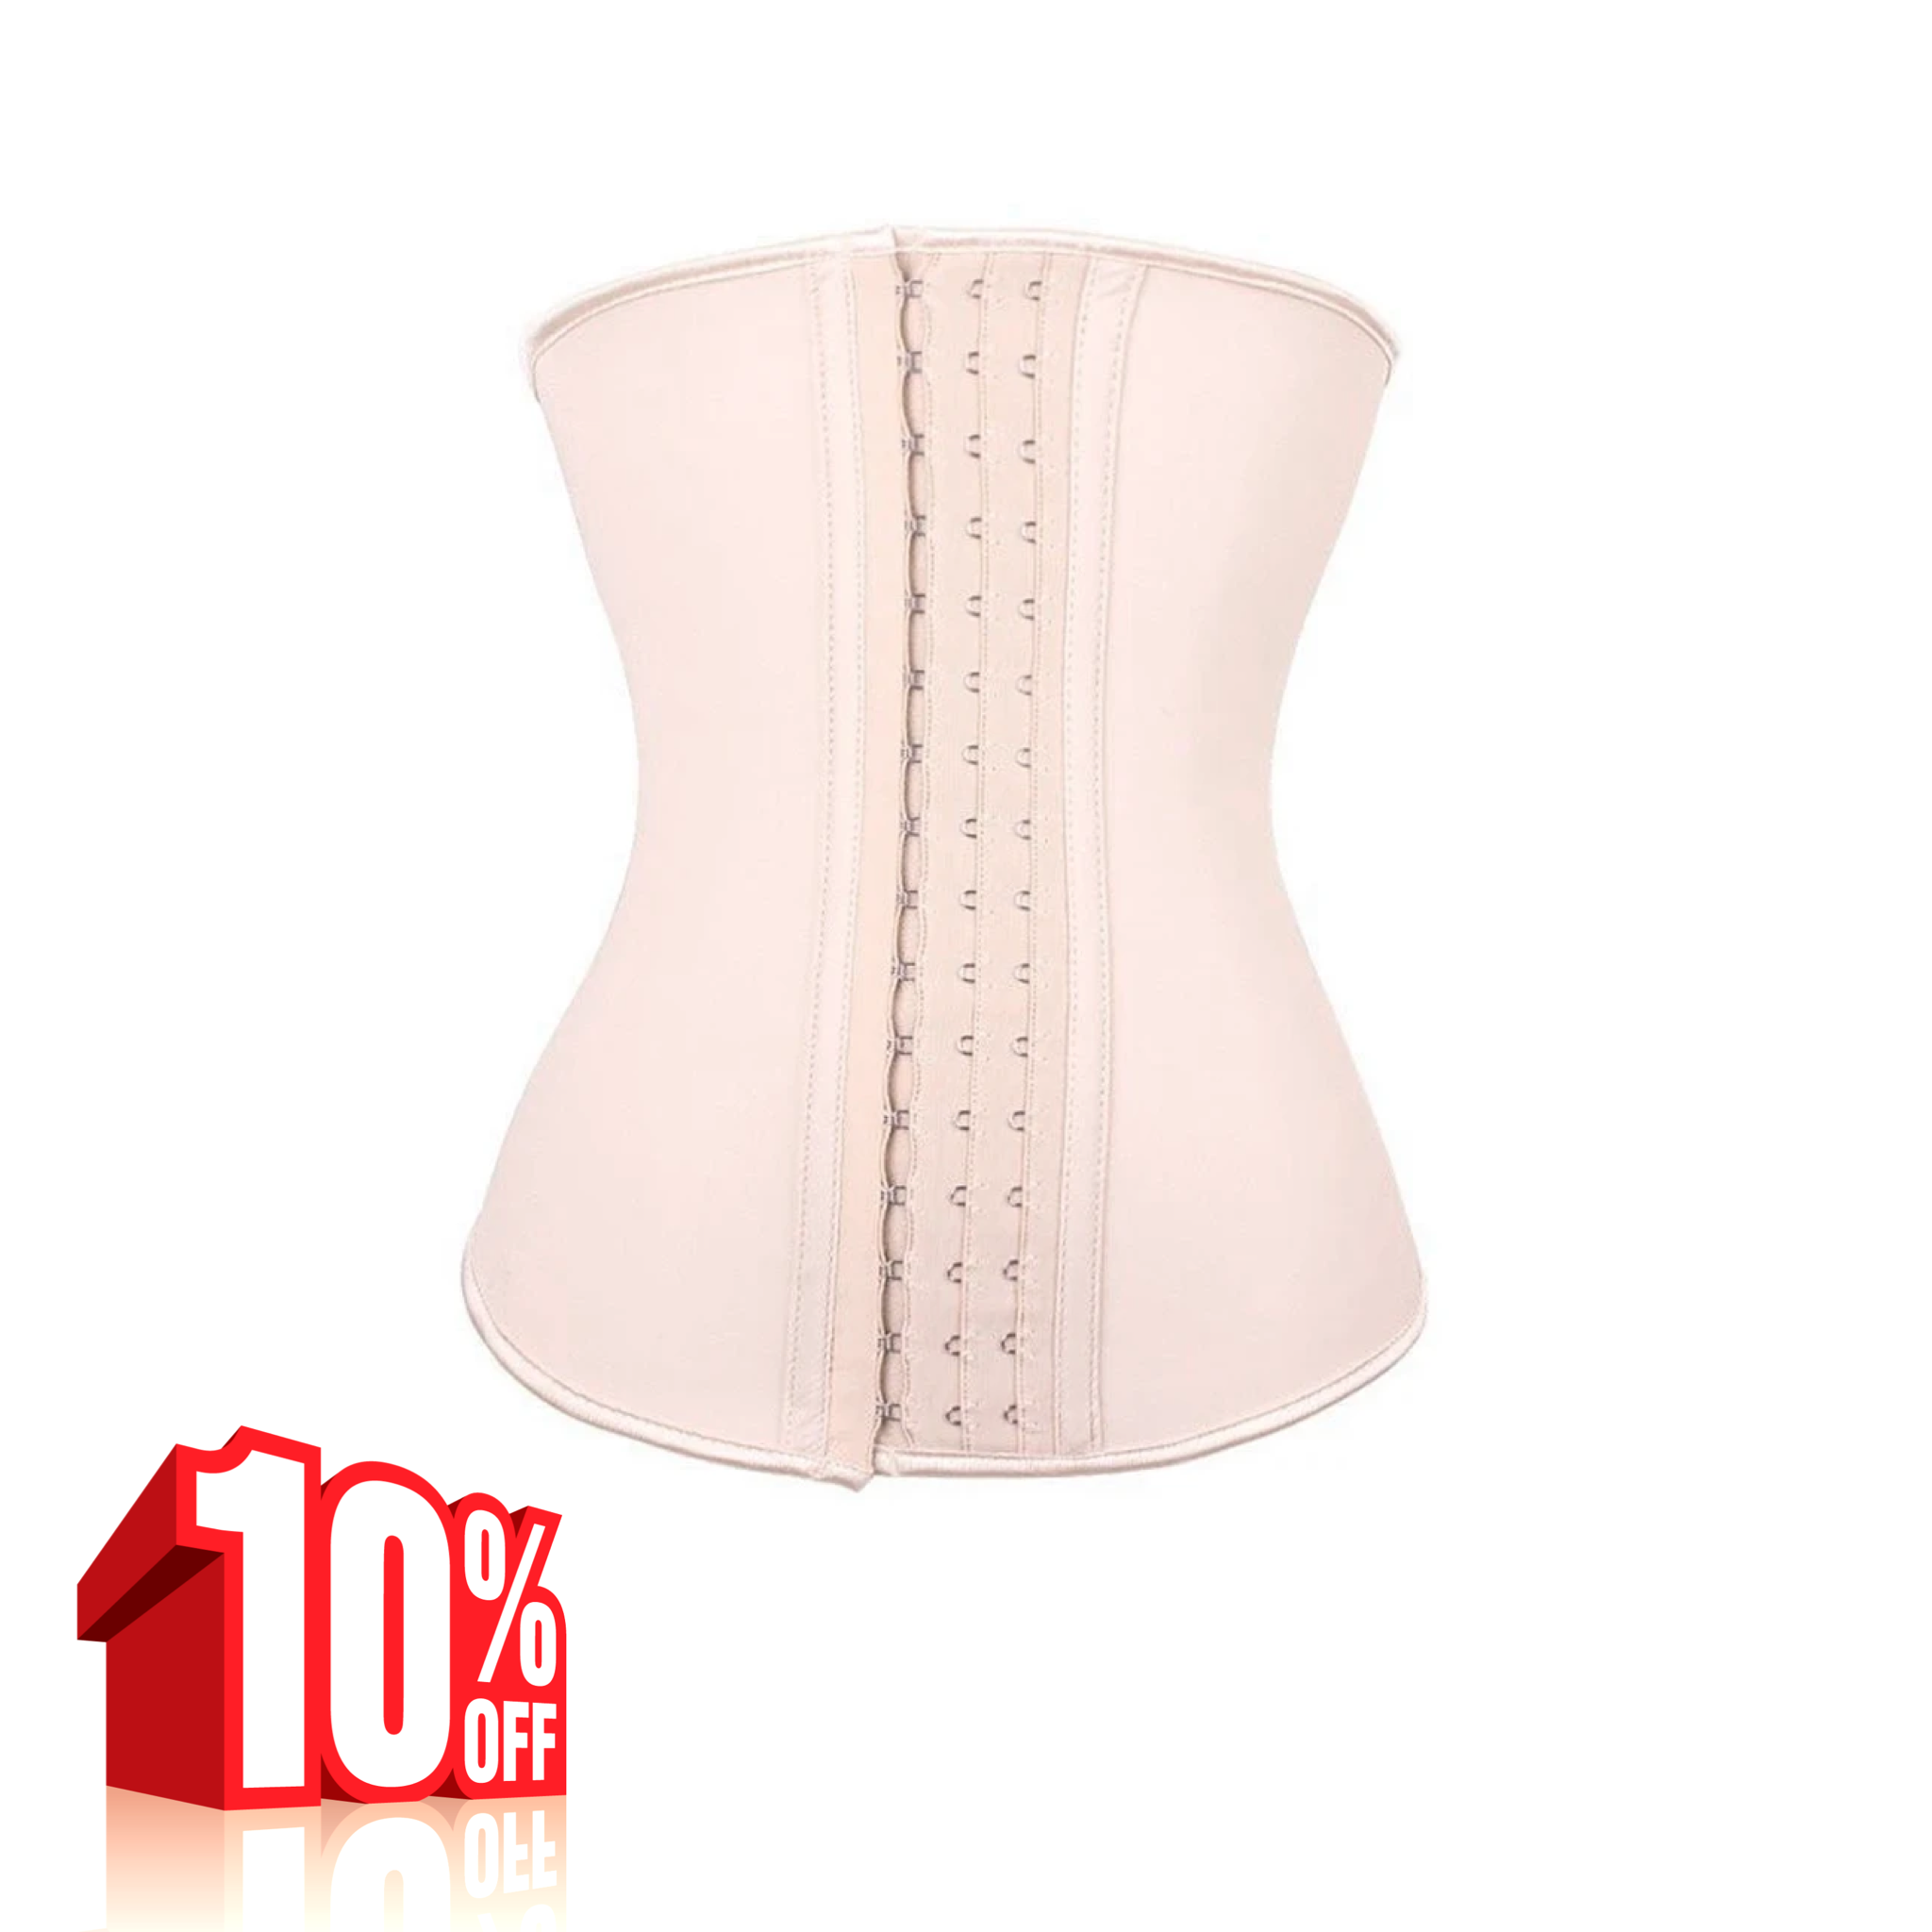 Fagas Colombianas Waist Trainer - Ivory